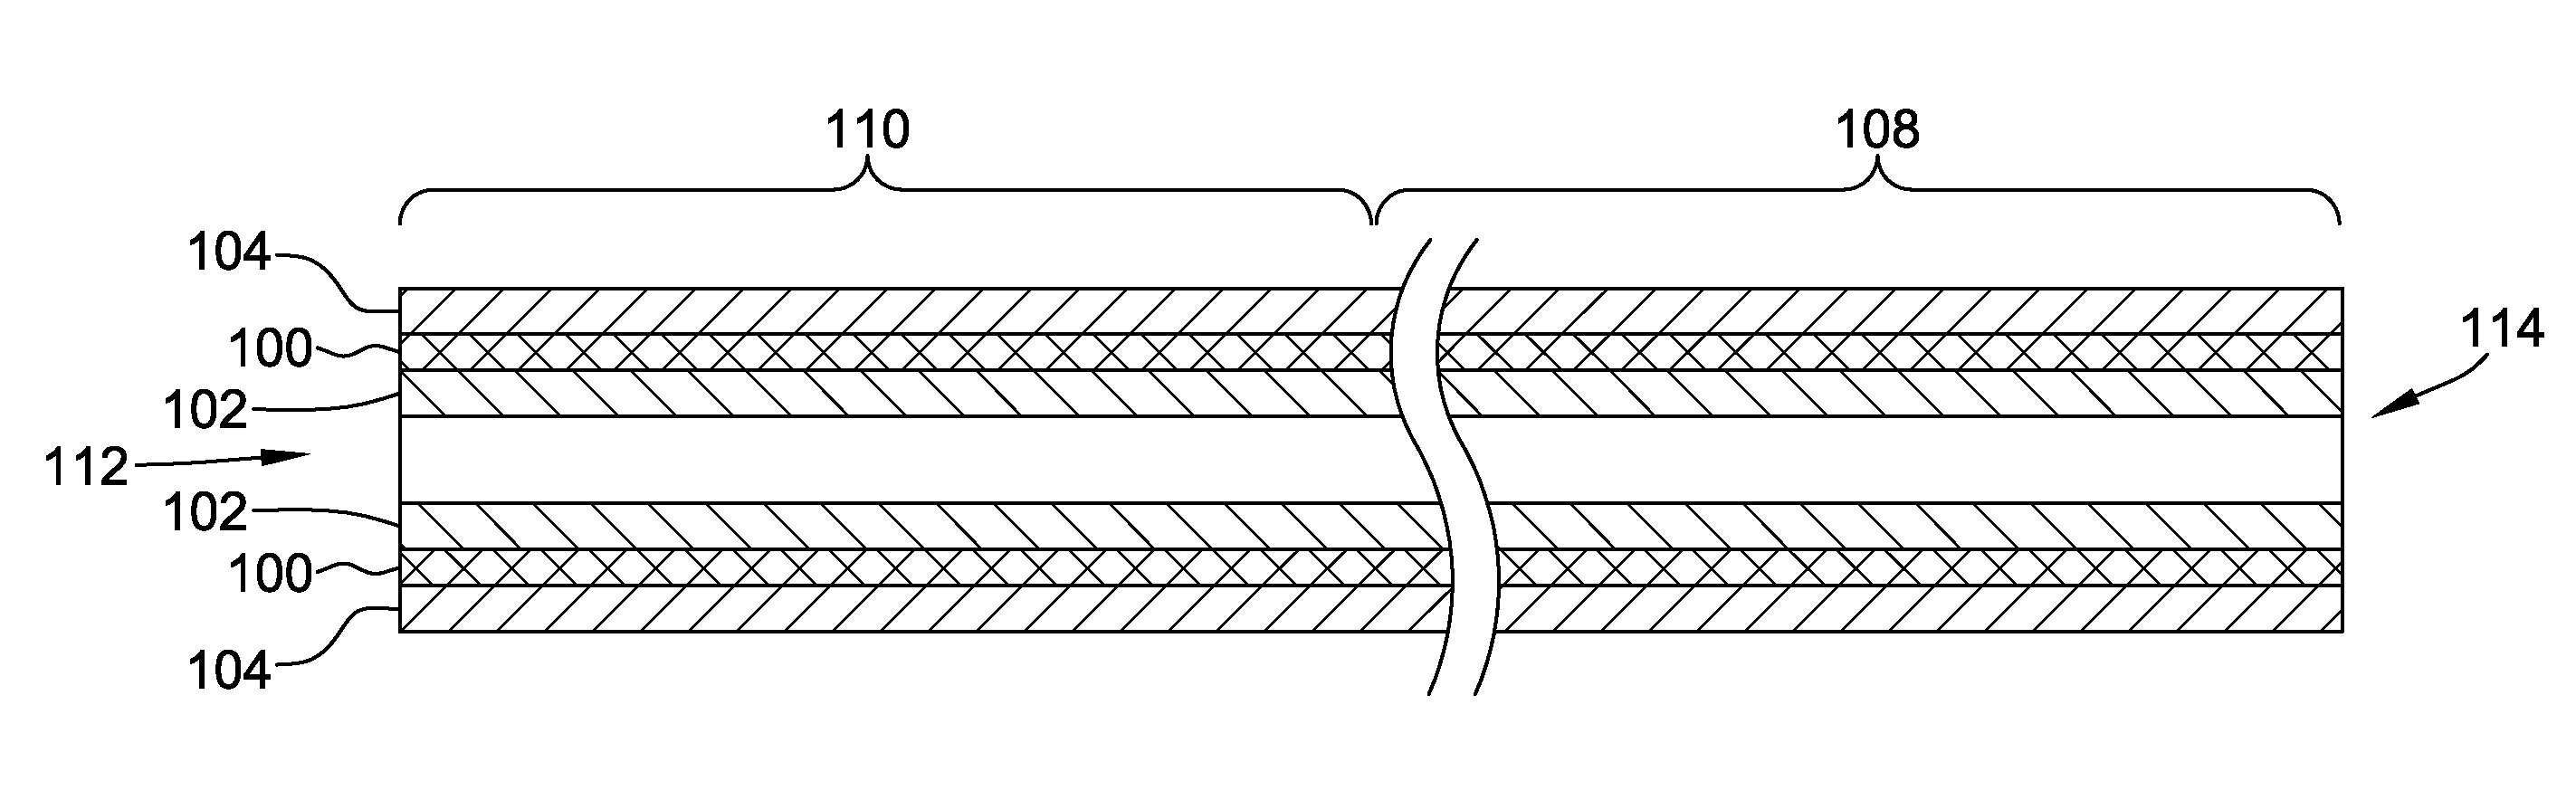 Flexible catheter shaft and method of manufacture